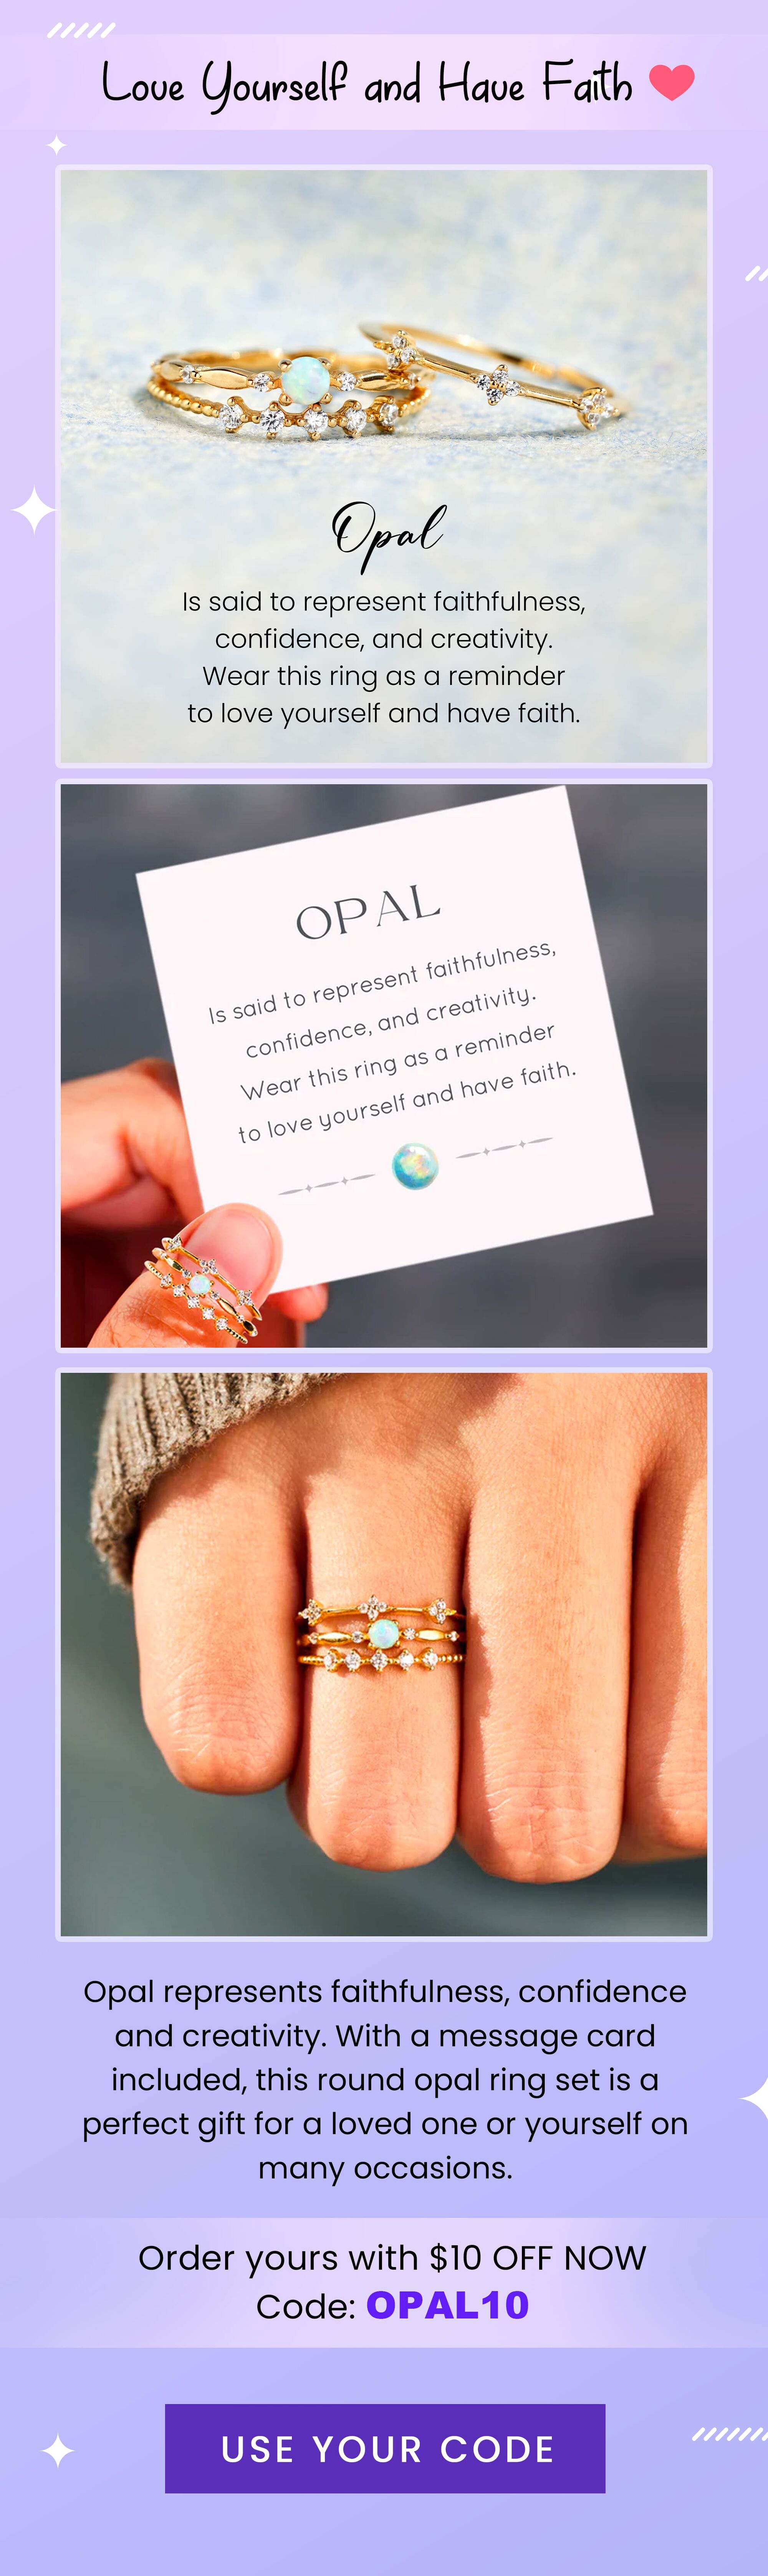 Love Yoursel? and Have Fdith @ Is said to represent faithfulness, confidence, and creativity. Wear this ring as a reminder to love yourself and have faith. Opal represents faithfulness, confidence and creativity. With a message card included, this round opal ring set is a perfect gift for a loved one or yourself on mMany occasions. Order yours with $10 OFF NOW Code: OPAL10 USE YOUR CODE 